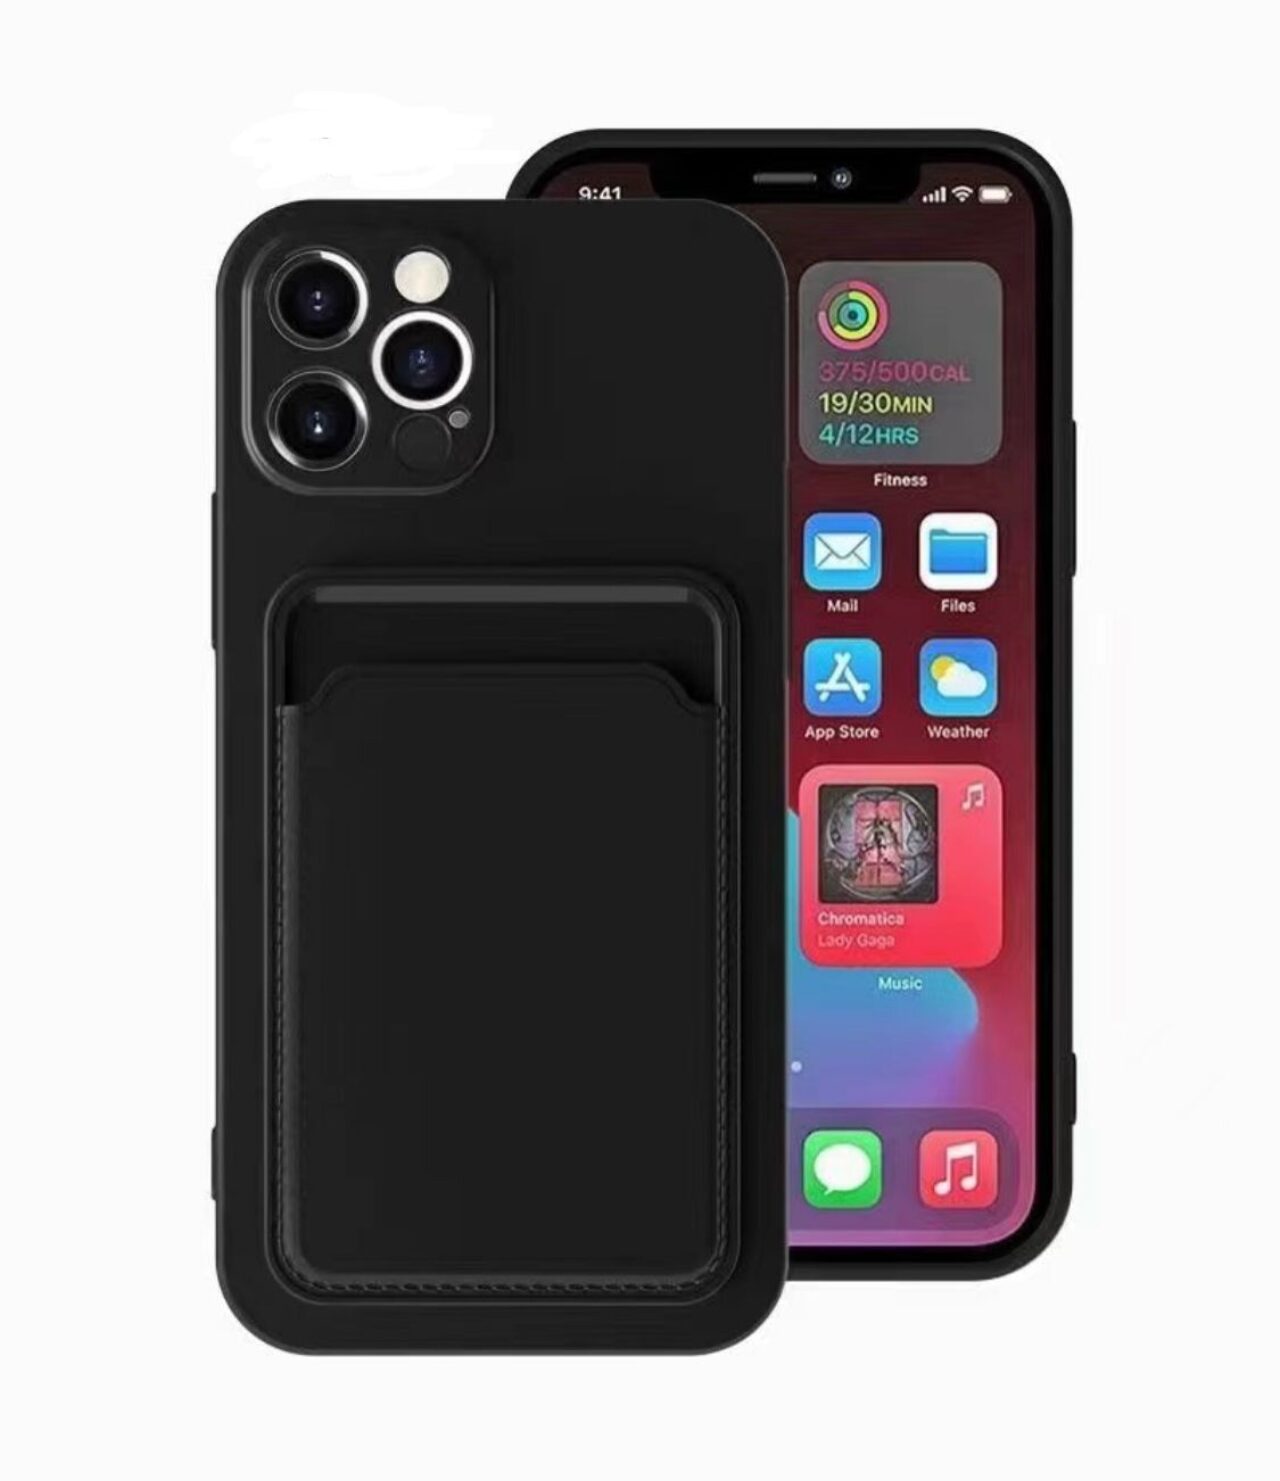 TPU Backcover Case With Card holder BLACK